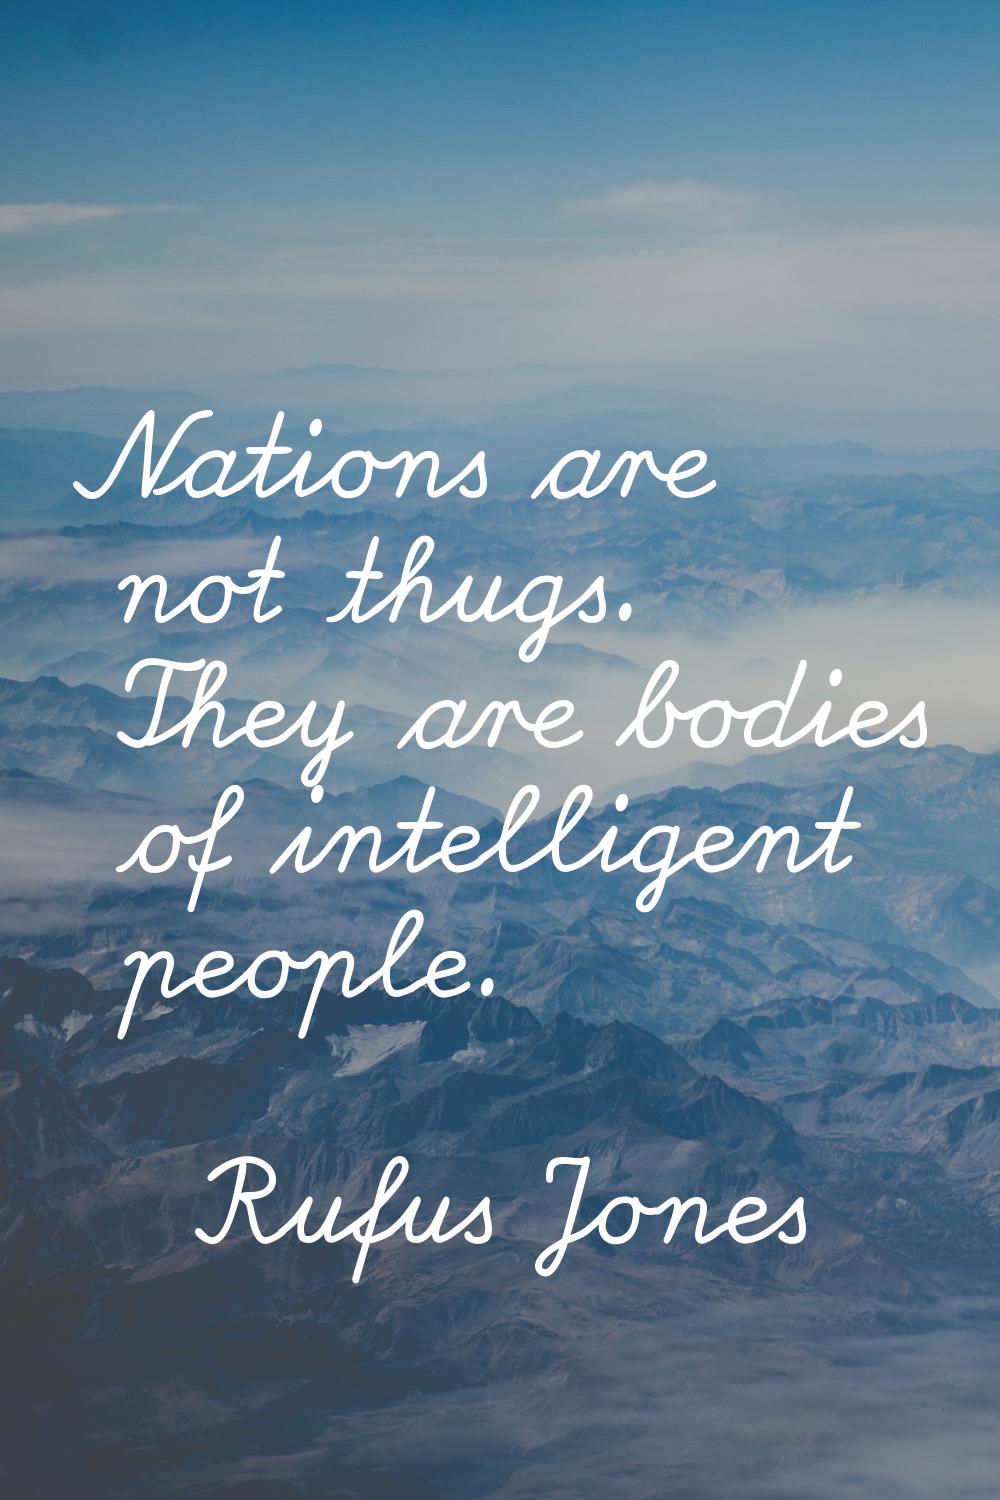 Nations are not thugs. They are bodies of intelligent people.